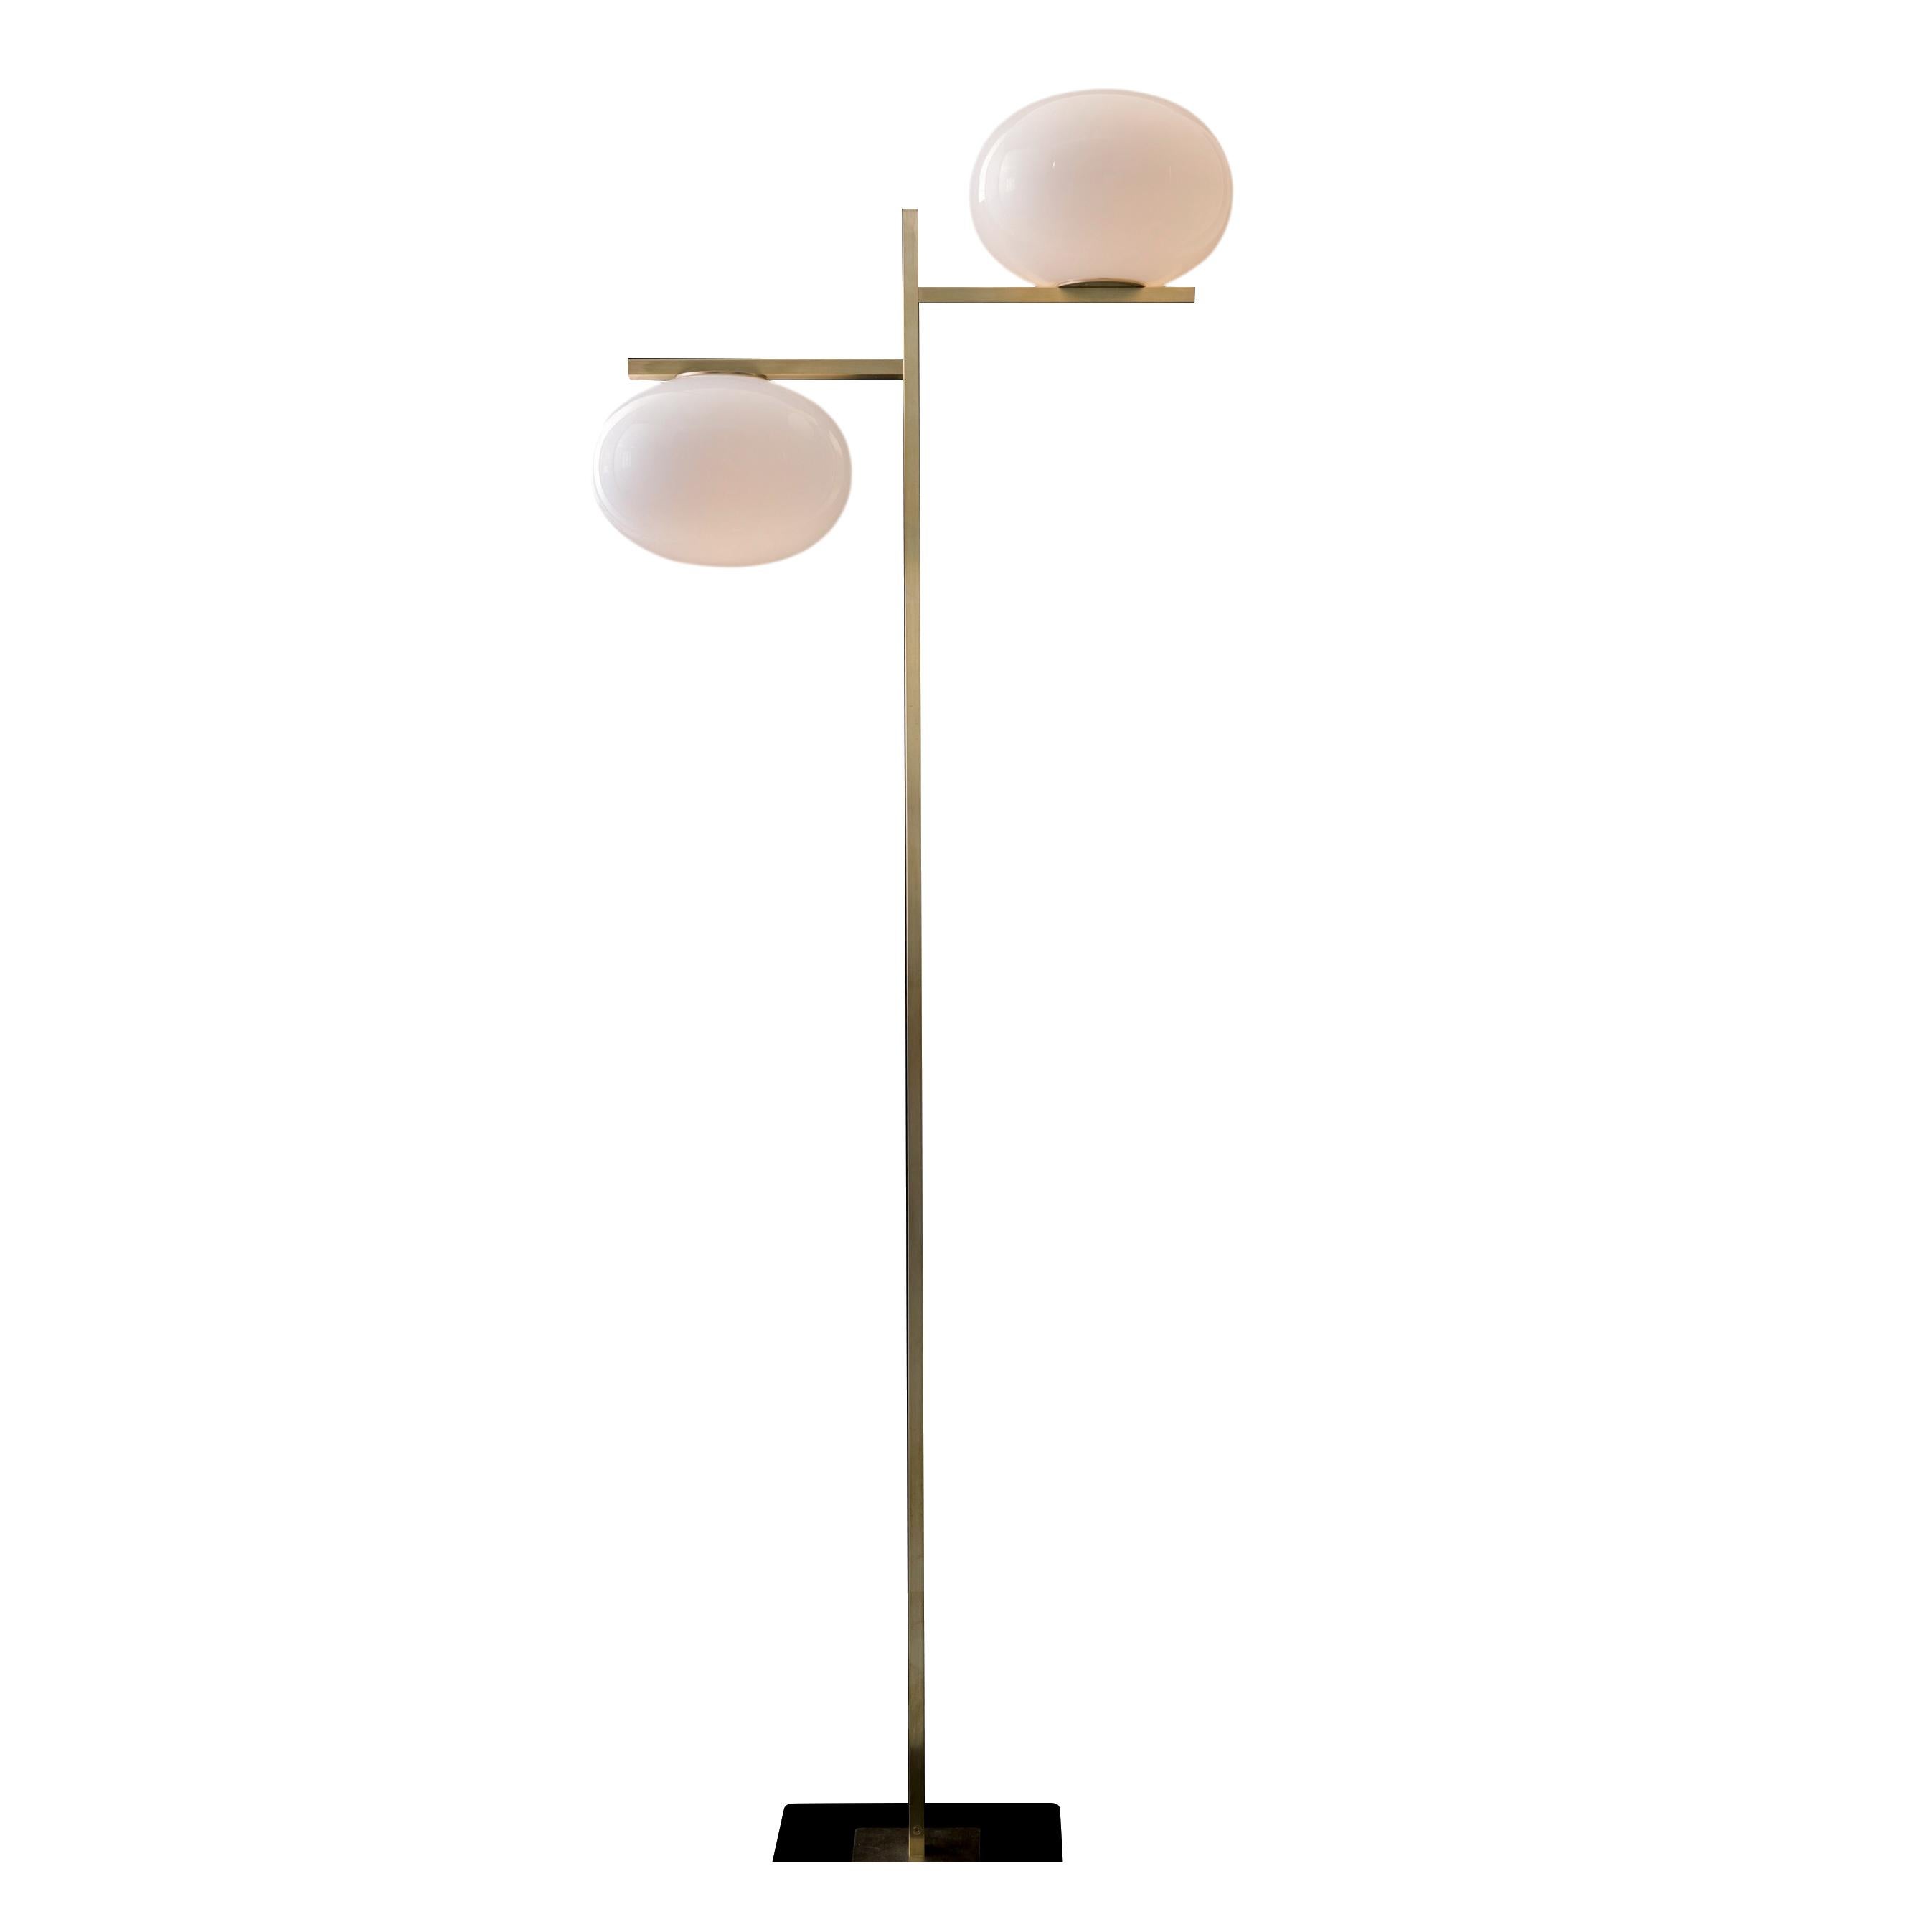 Italian Mariana Pellegrino Soto Two Arms Floor Lamp 'Alba' by Oluce For Sale